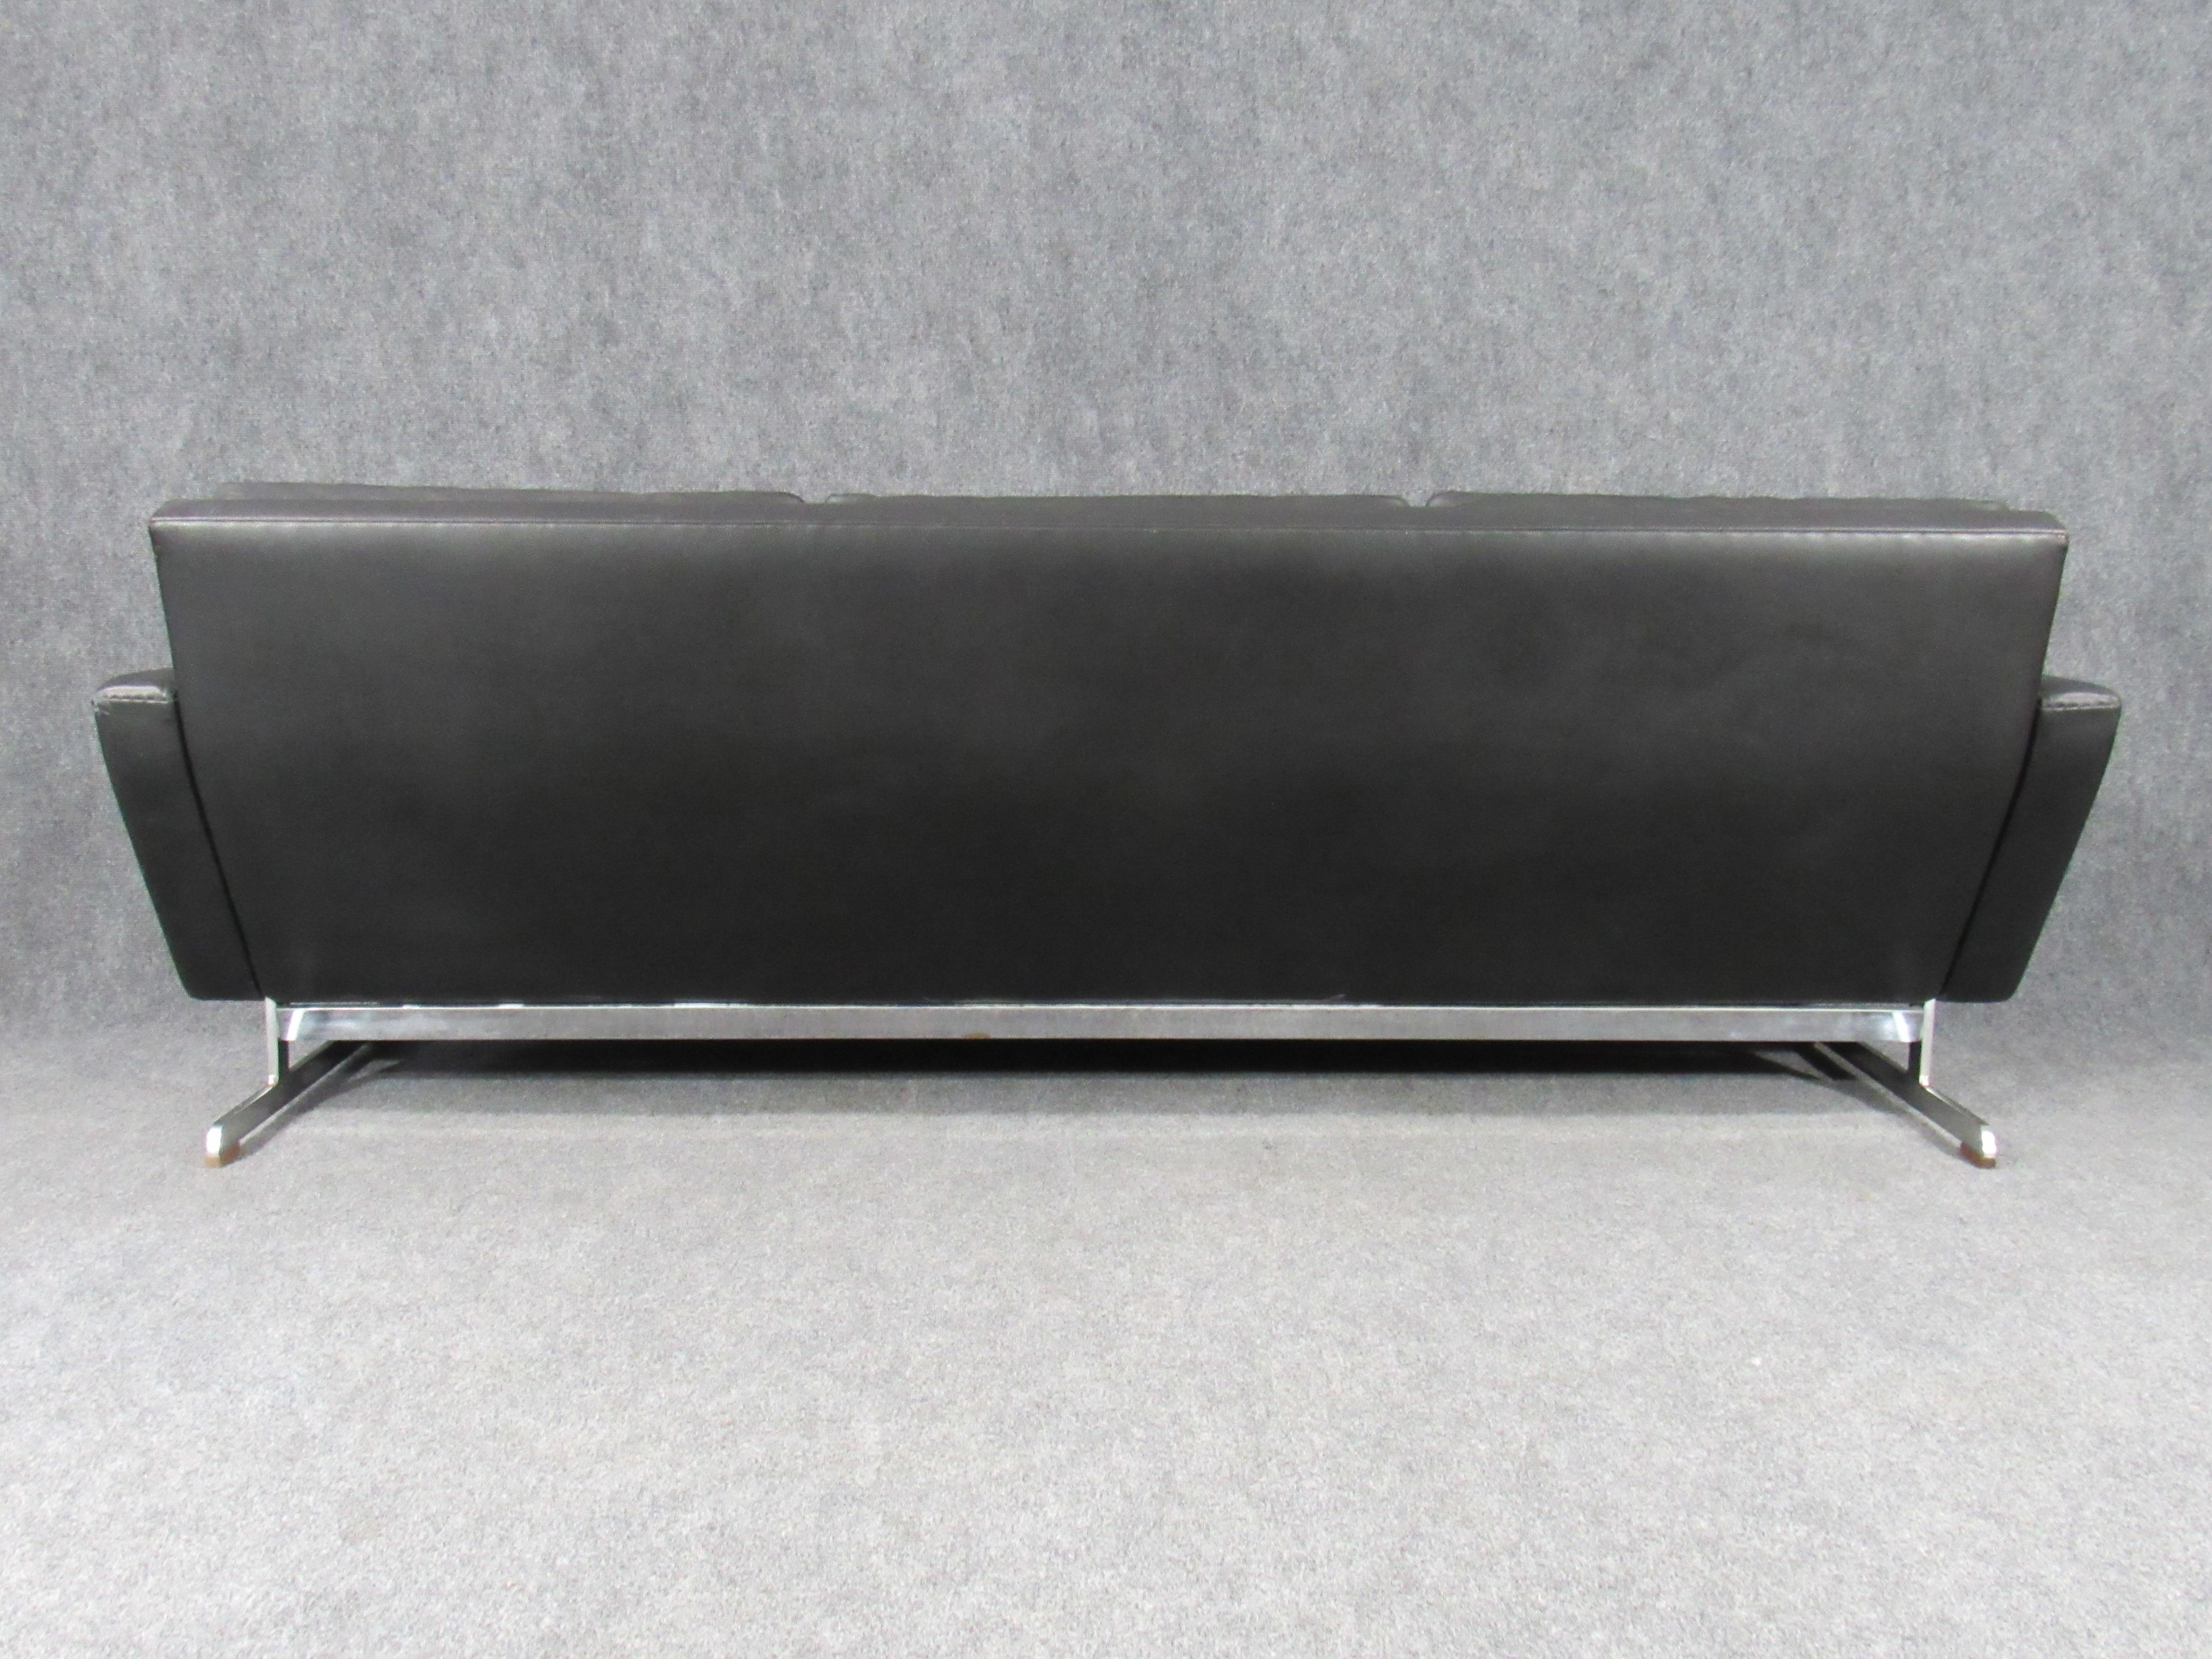 Midcentury Danish Modern Sofa in Faux Black Leather Attributed to Georg Thams In Good Condition For Sale In Belmont, MA